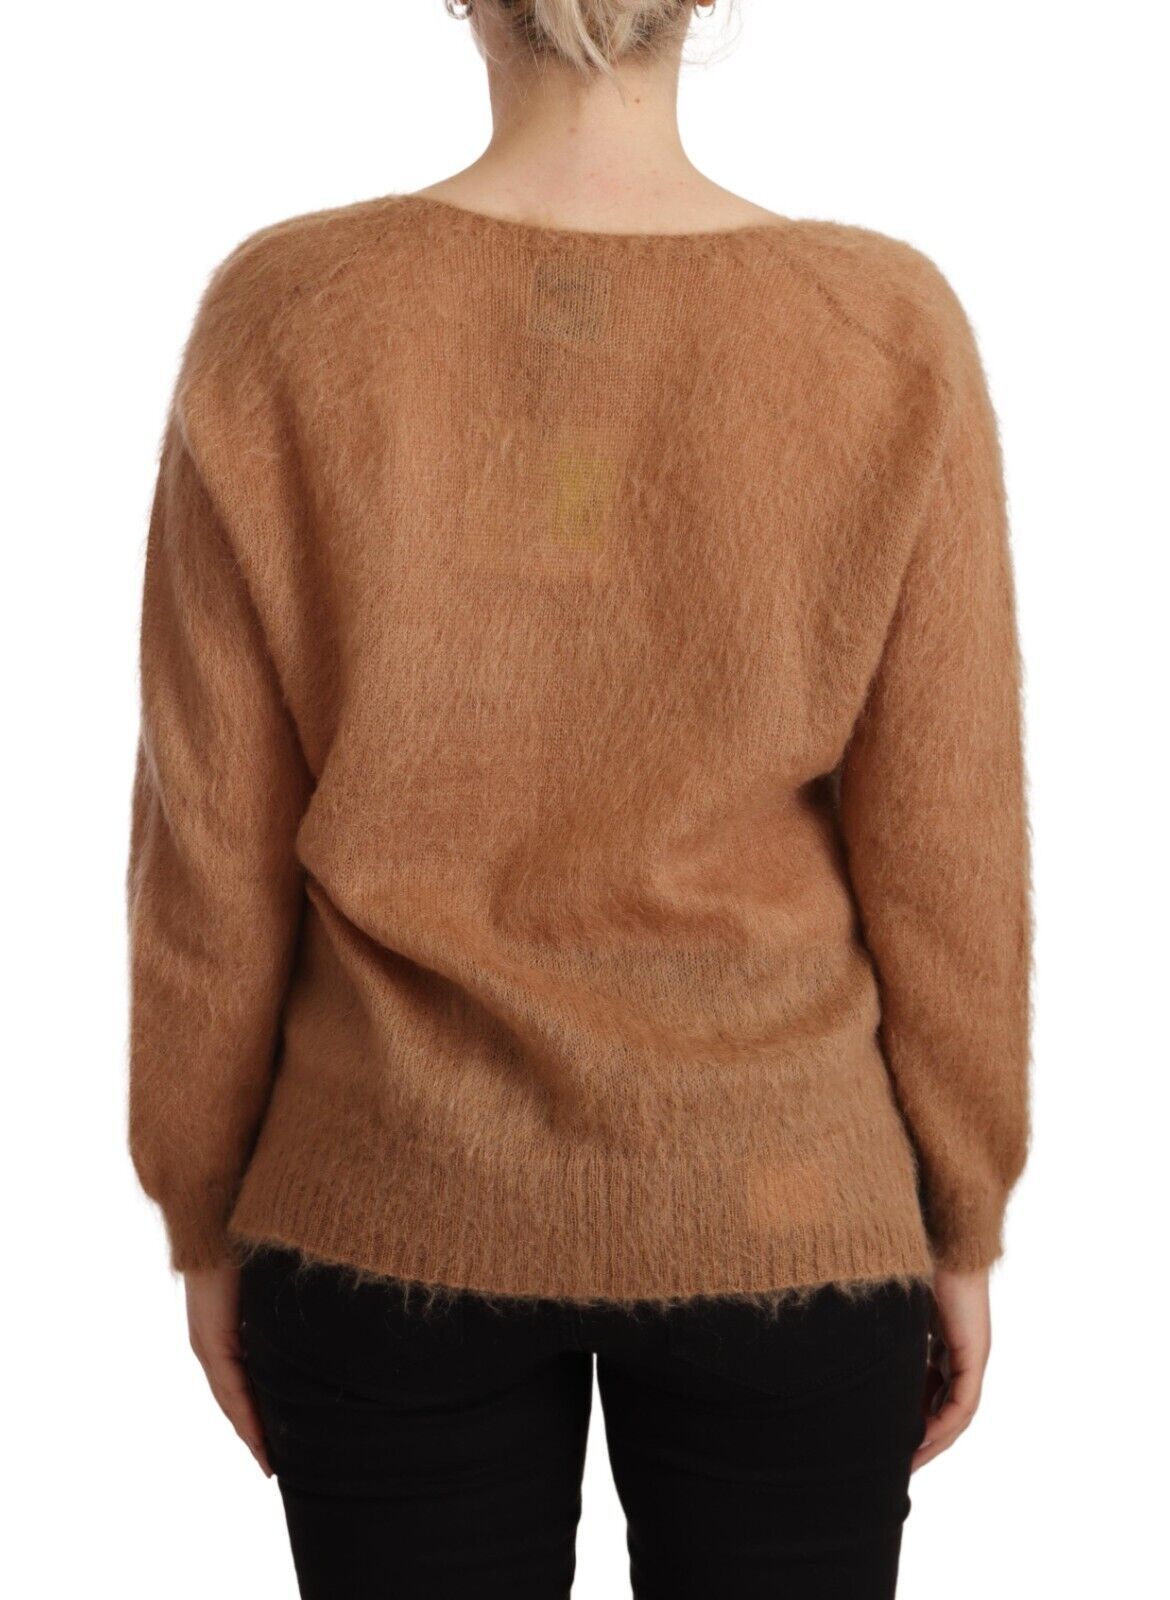 Chic Brown Knit Cardigan with Front Button Closure